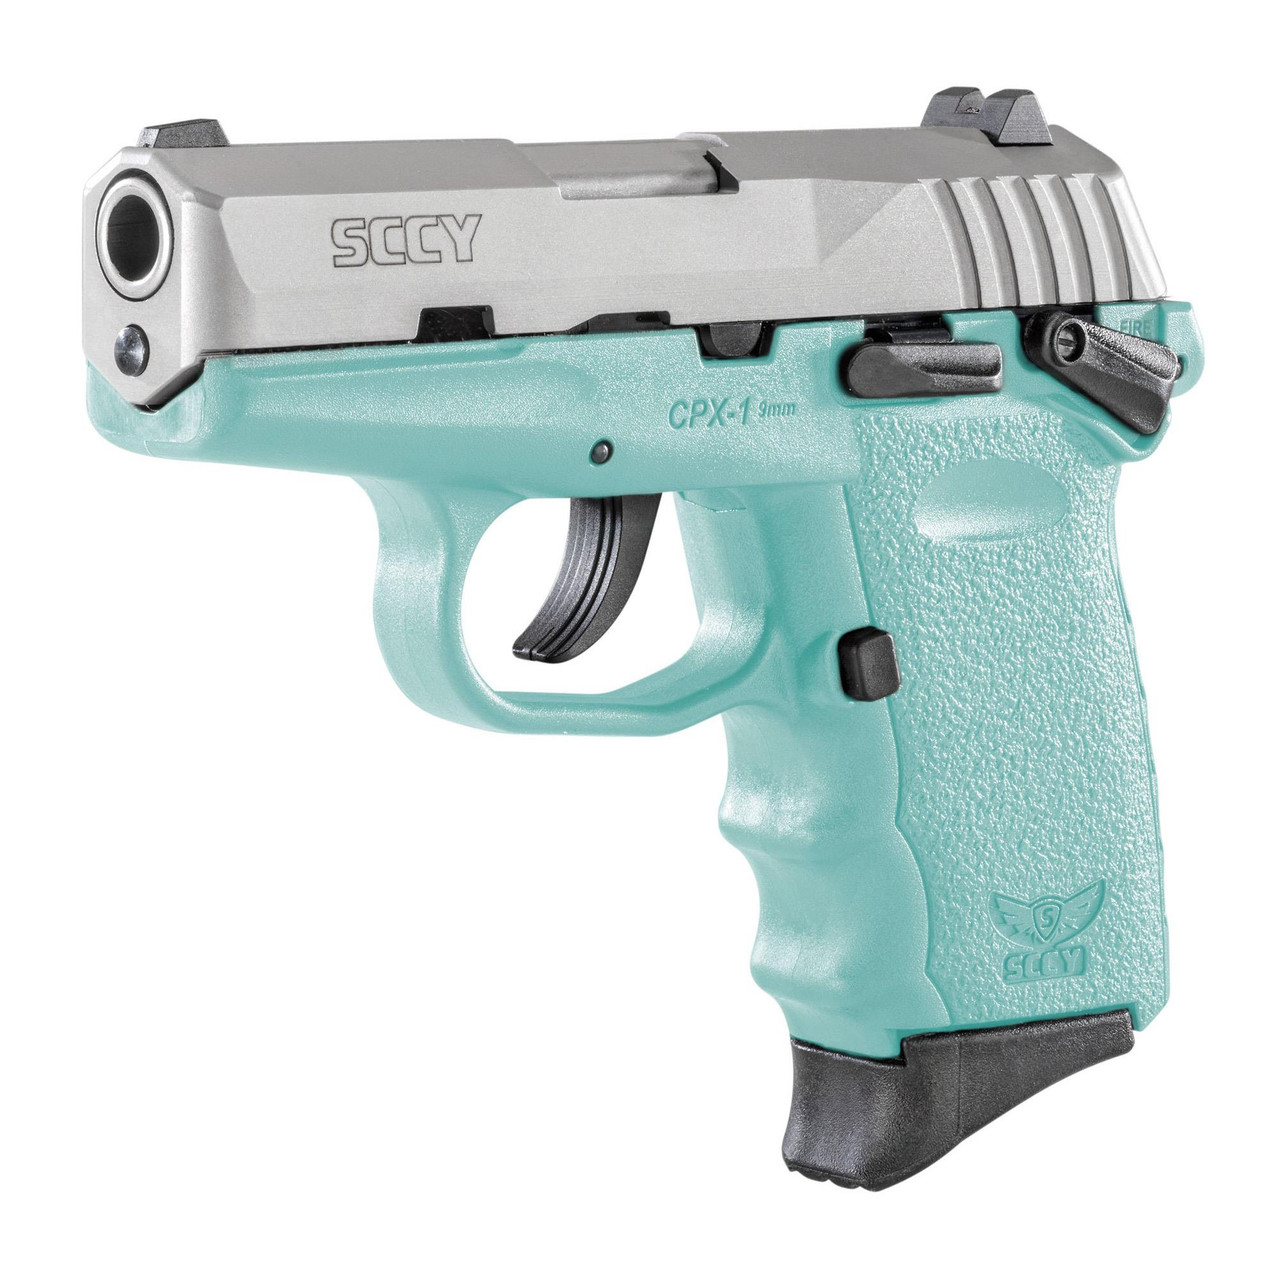 SCCY Industries Firearms CPX-1 Robin Egg Blue Polymer Frame with Stainless Steel Slide, Thumb Safety